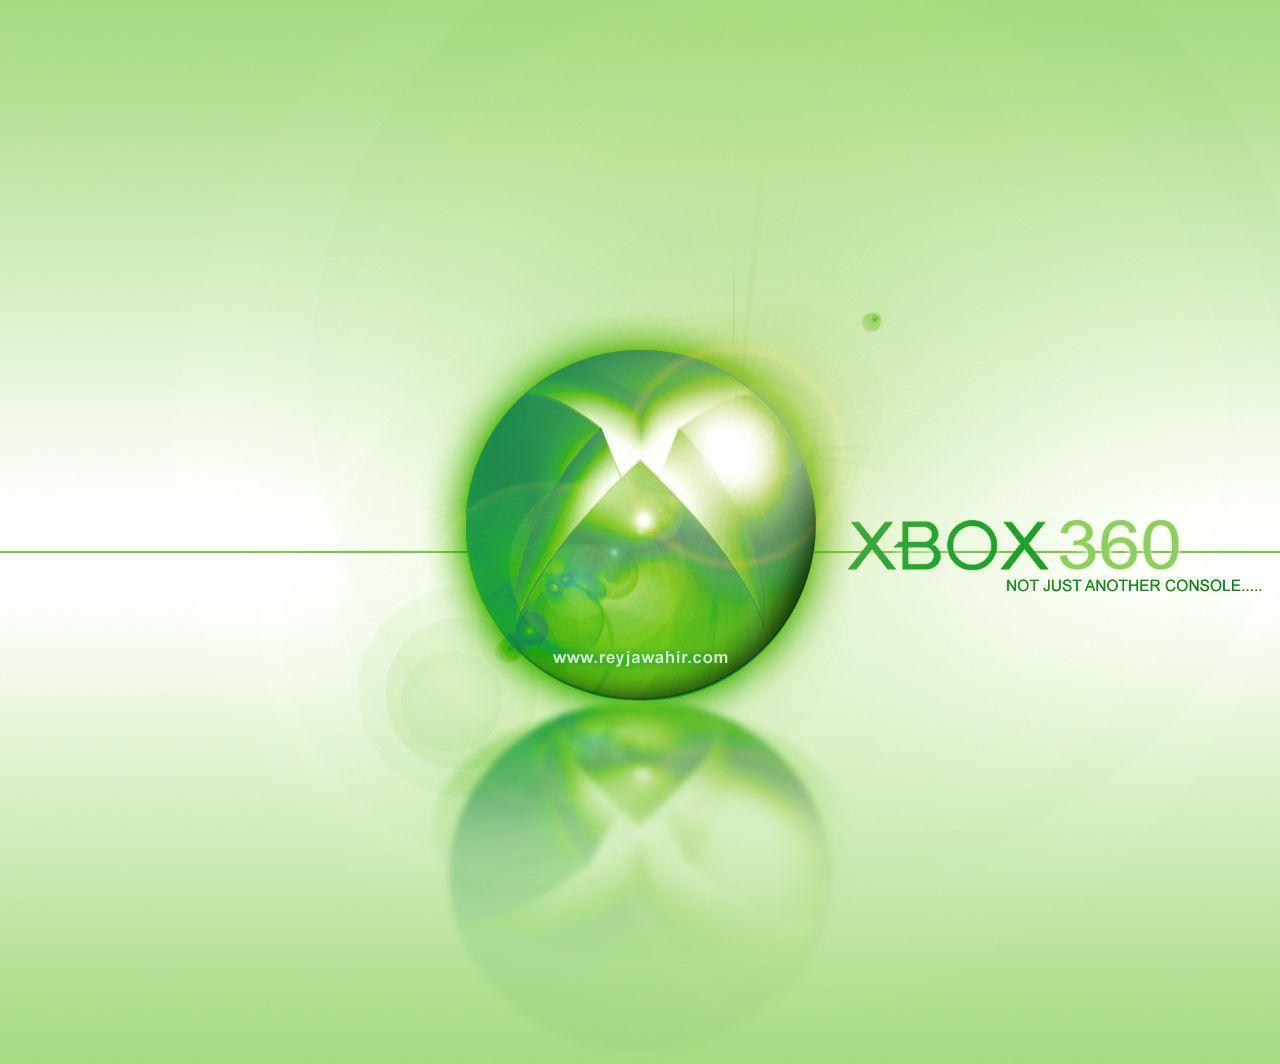 Another Xbox 360 Wallpaper